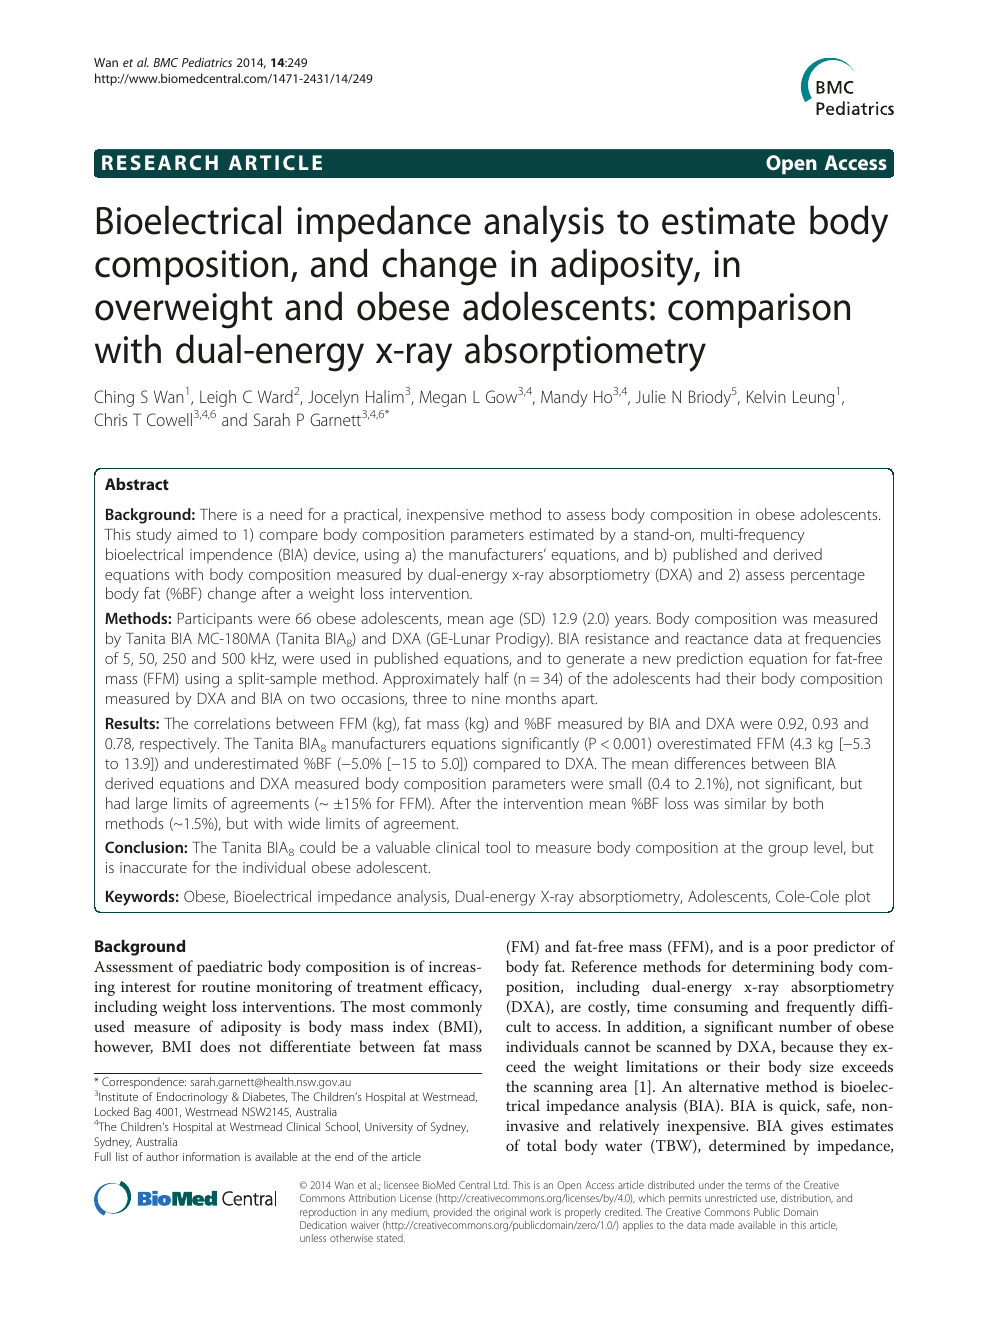 Body Composition Evaluation: A Clinical Practice Tool